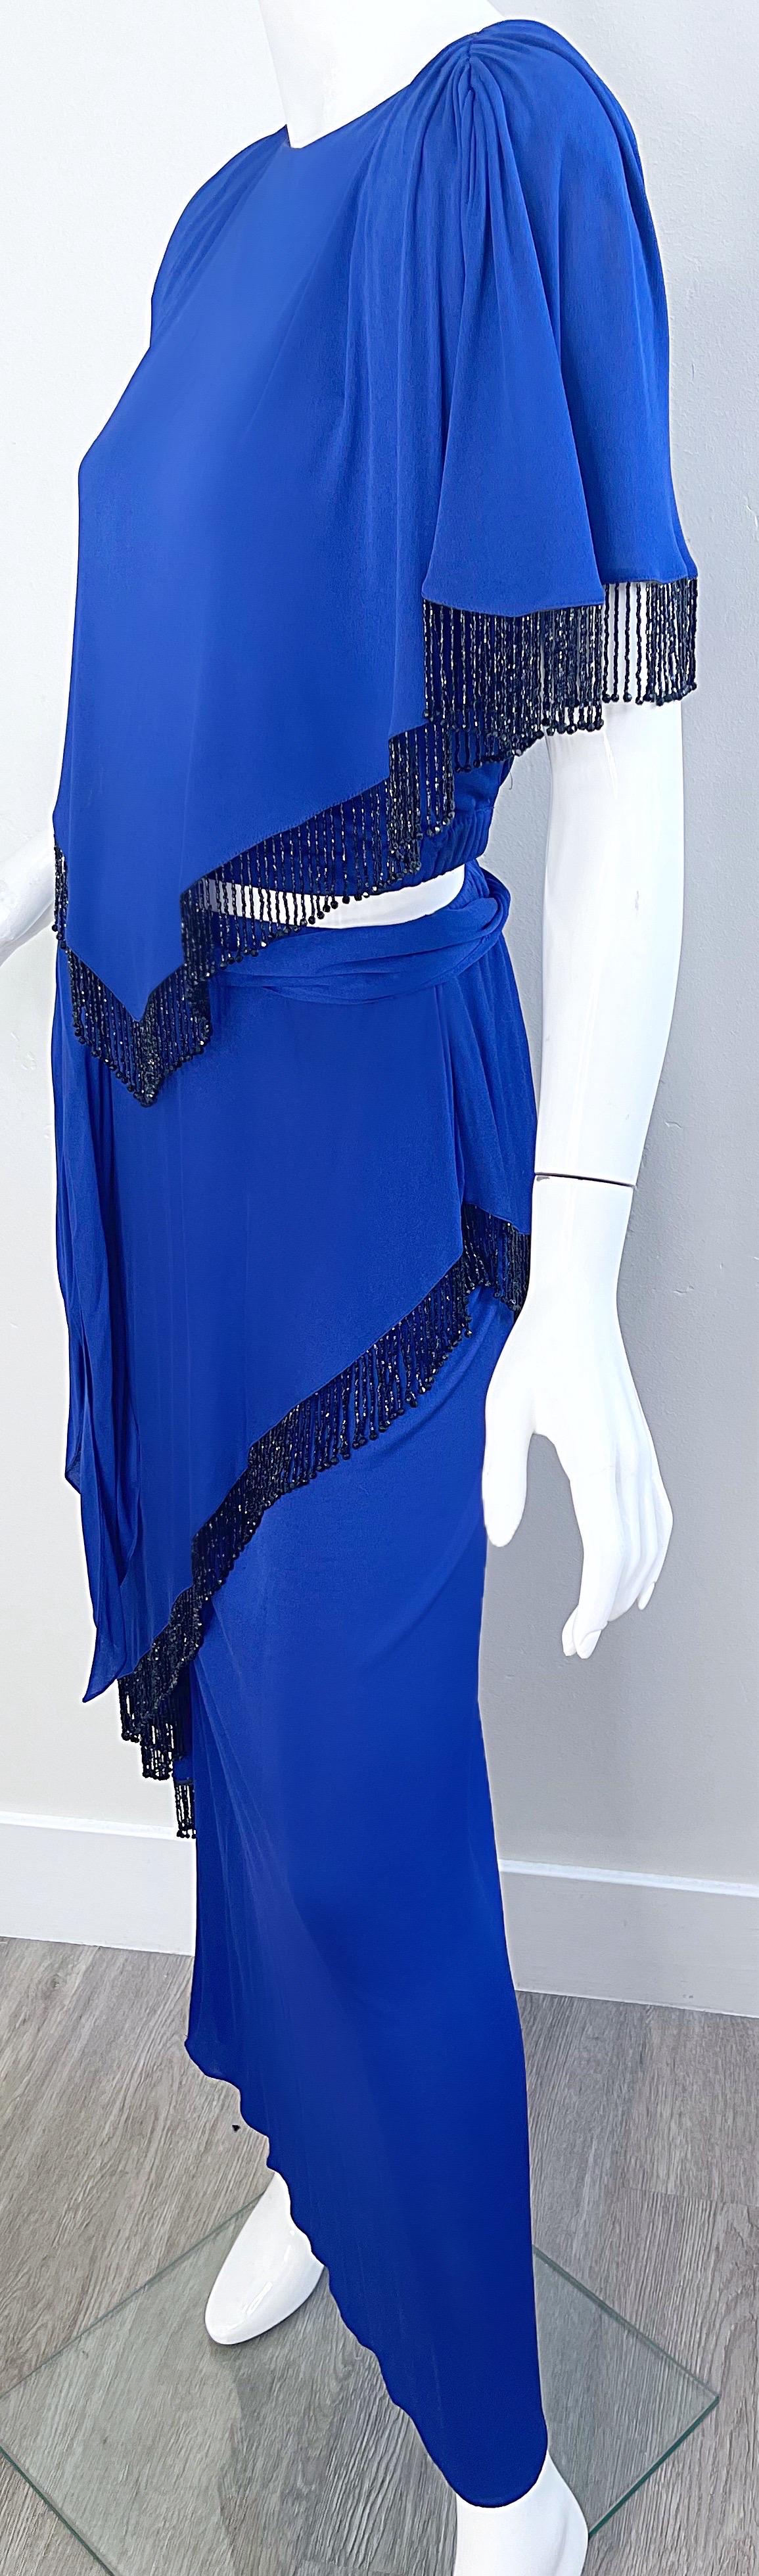 Holly’s Harp 1970s Royal Blue Silk Jersey Beaded 3 Piece Vintage 70s Ensemble For Sale 14